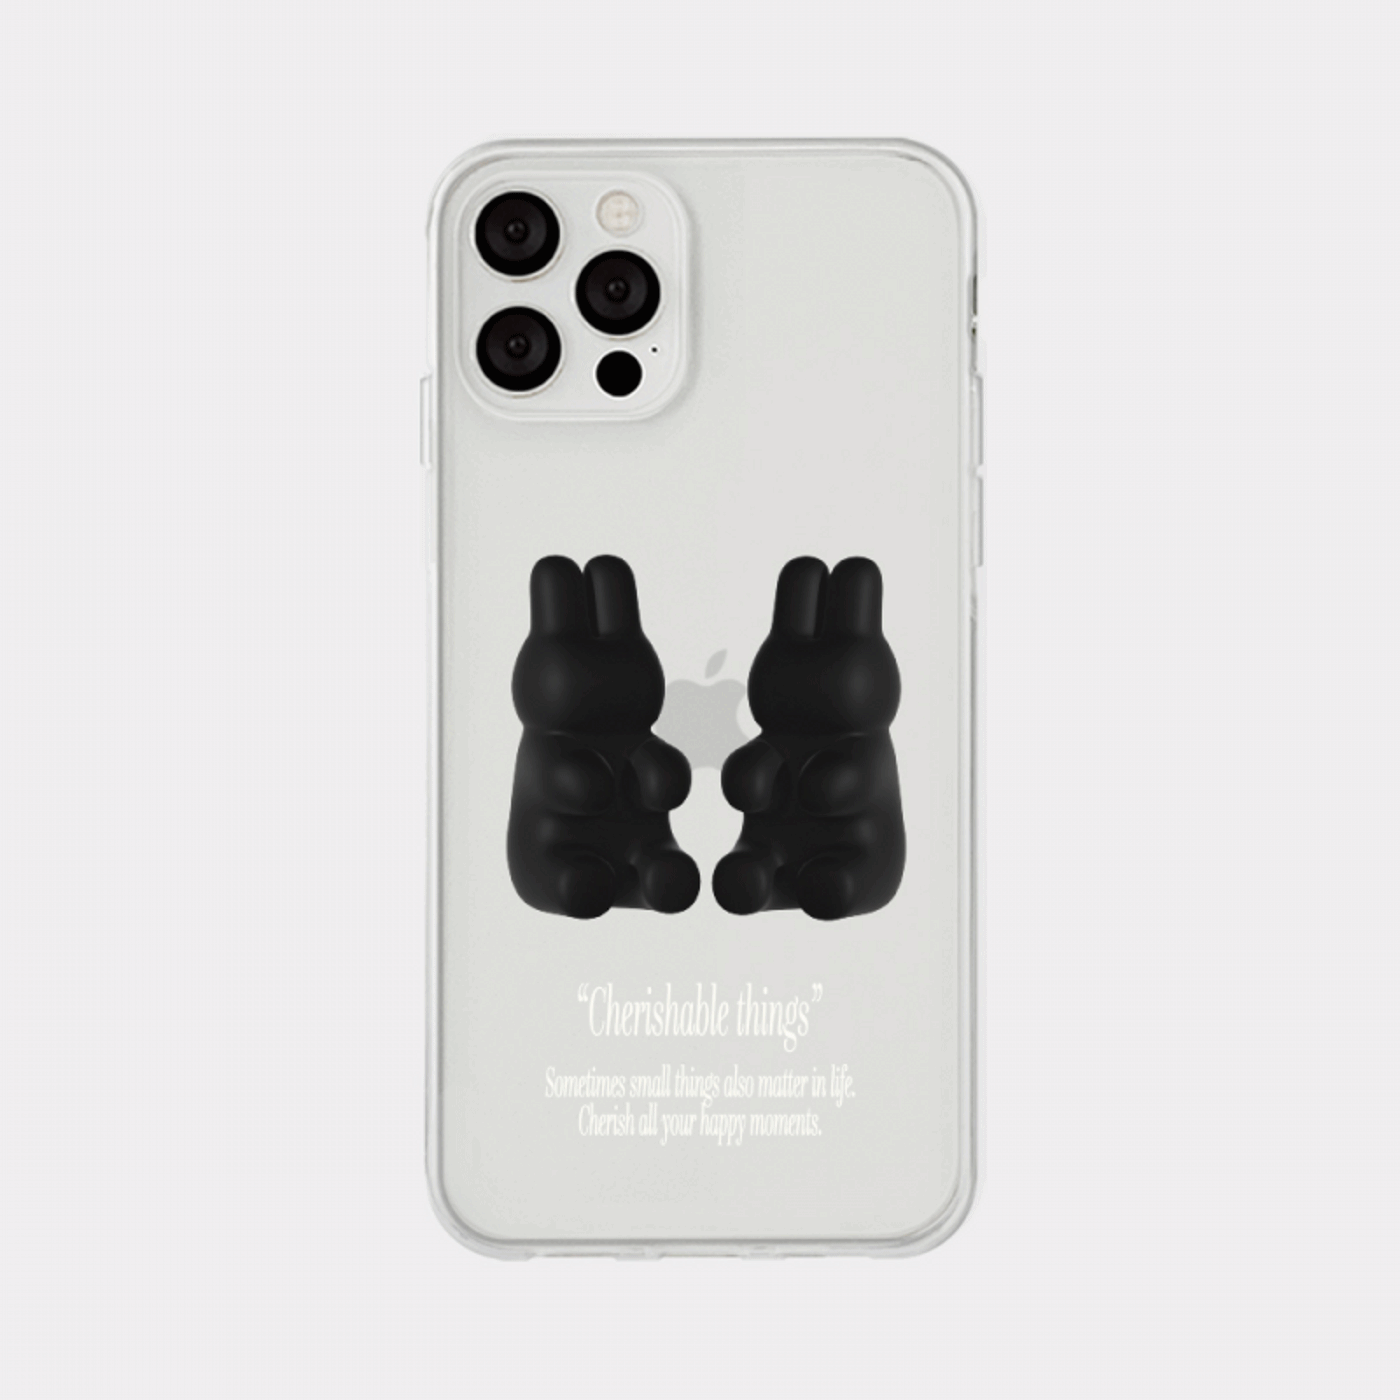 cherishable things design [clear phone case]